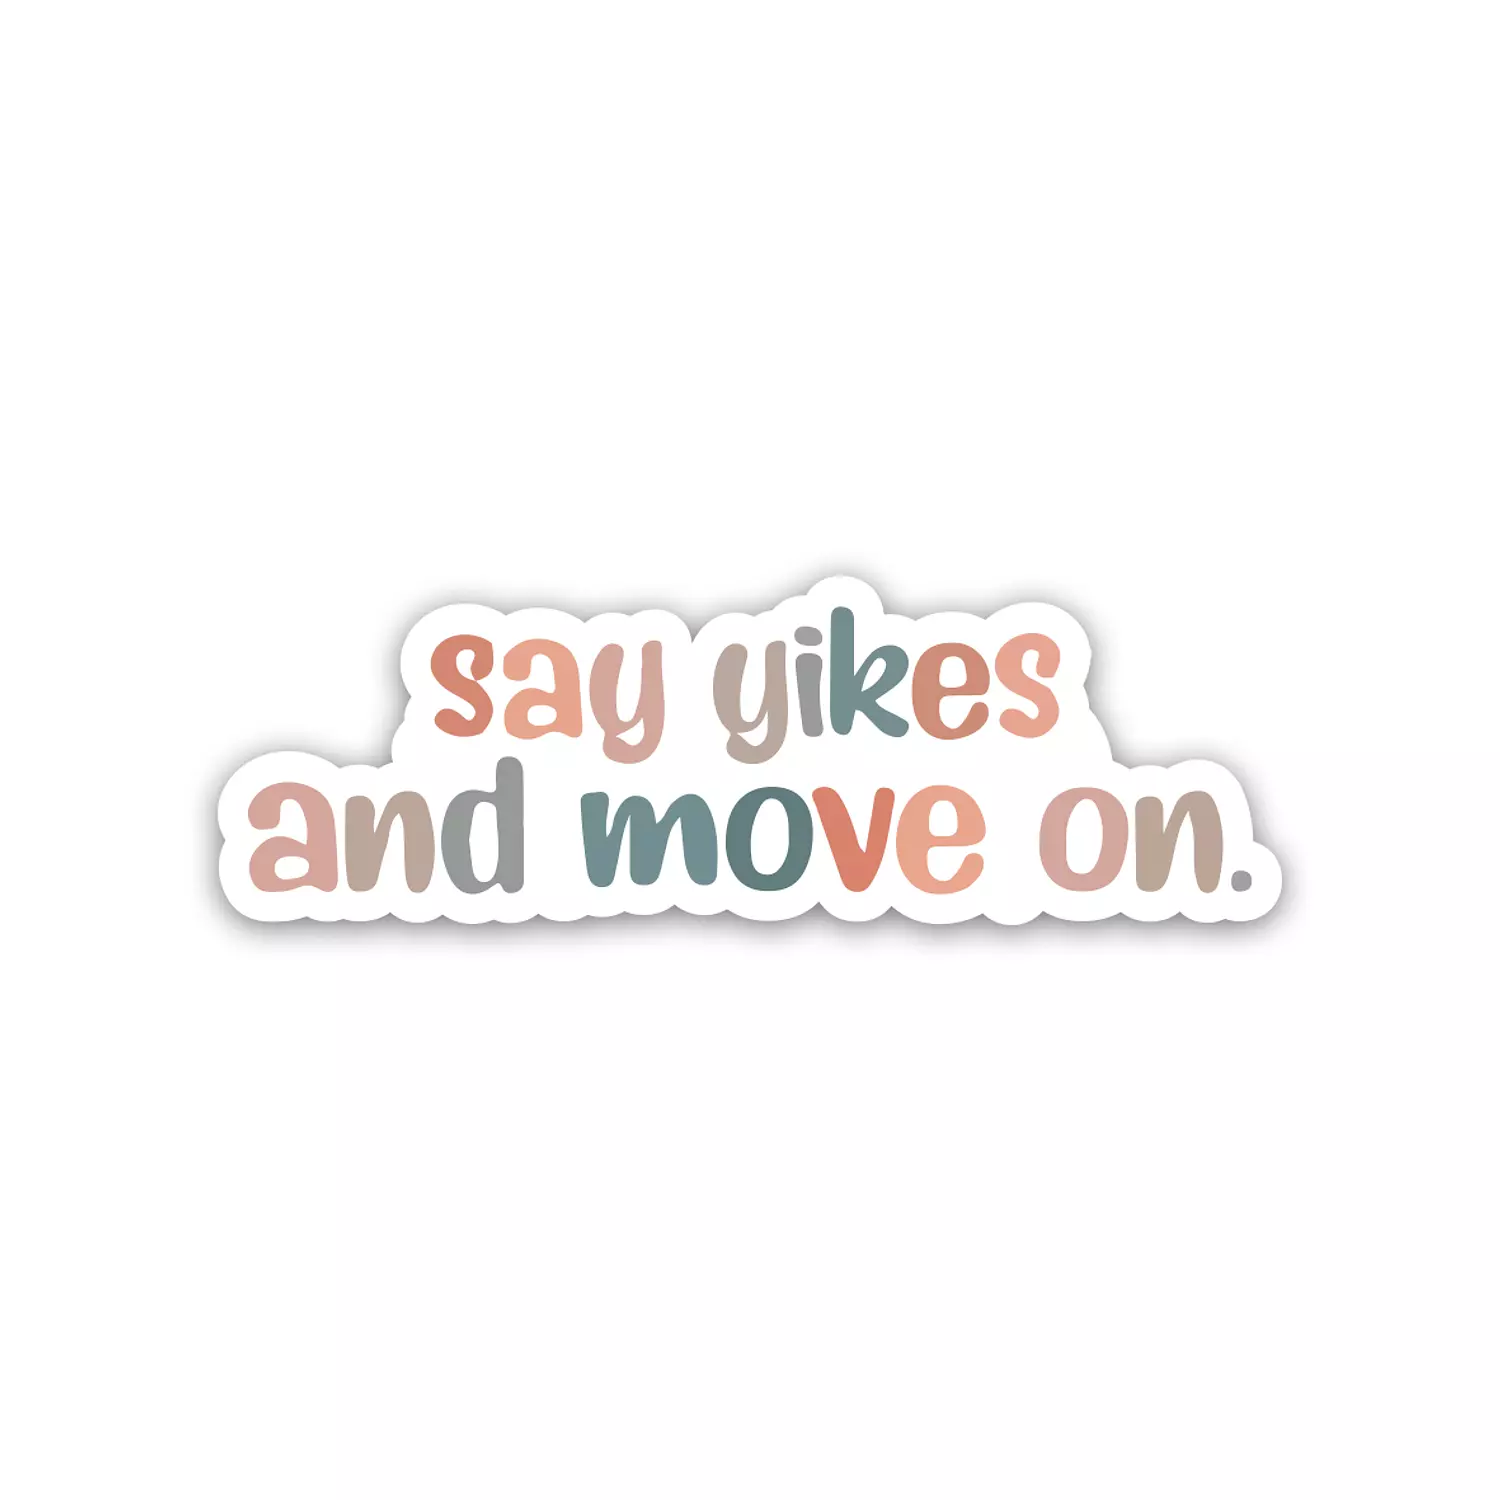 Say Yikes and move on - Positive Quotes  hover image